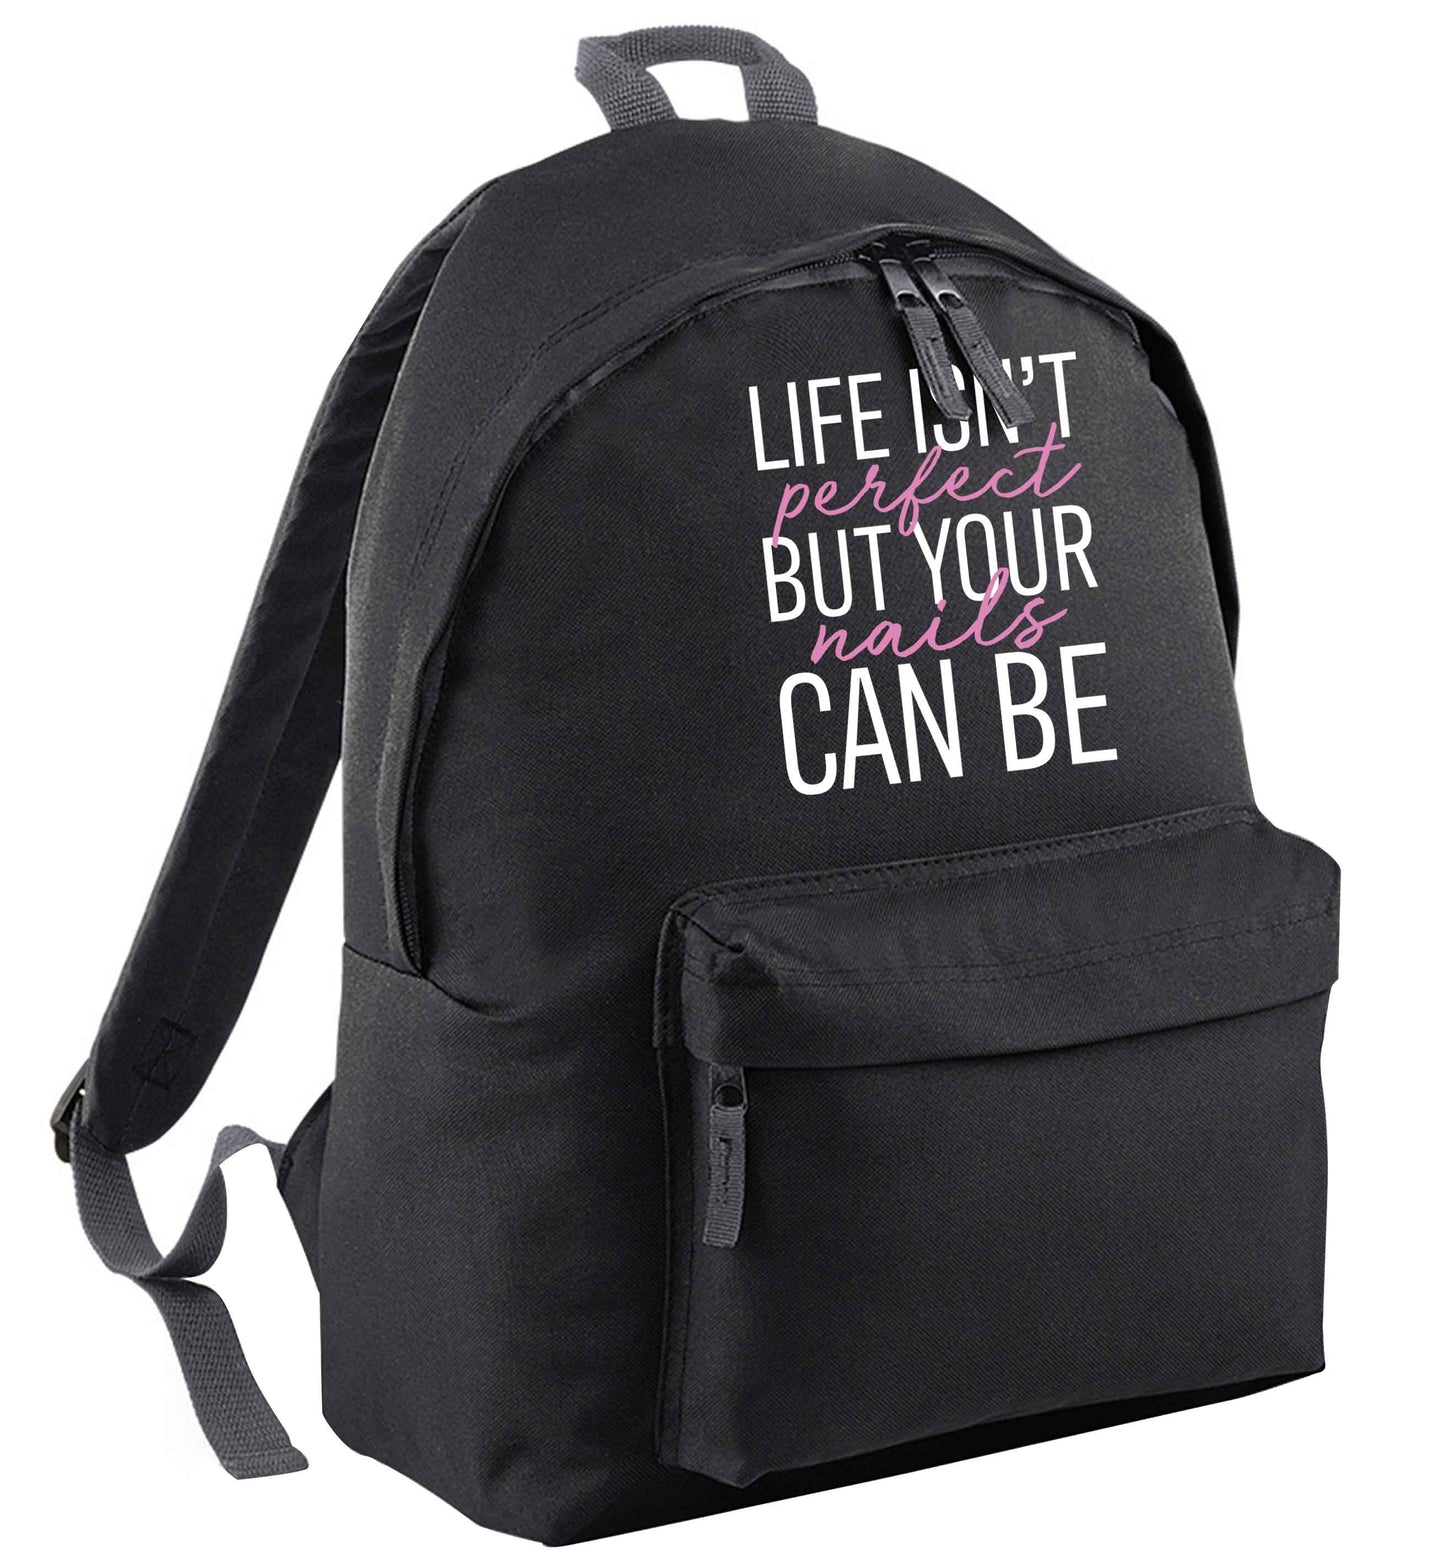 Life isn't perfect but your nails can be black adults backpack